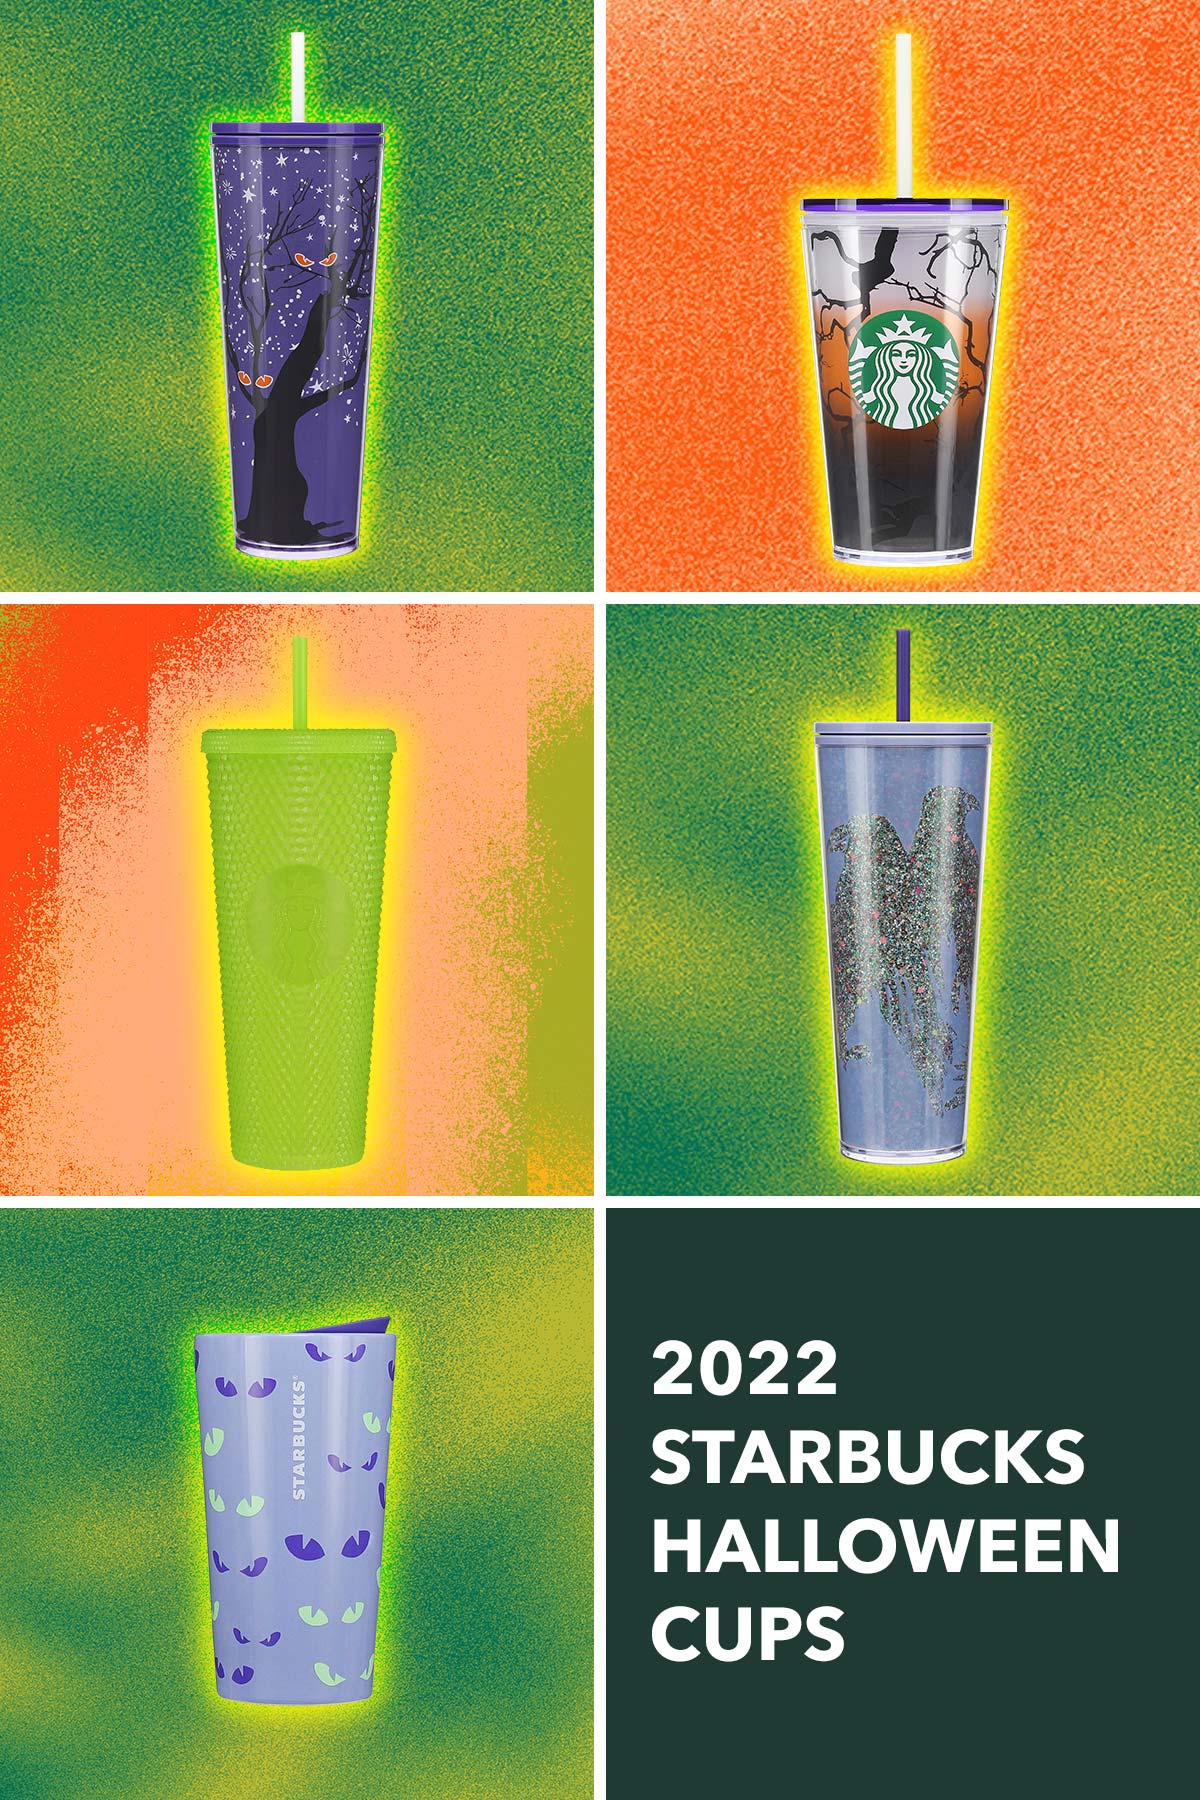 Starbucks halloween themed cups and tumblers.